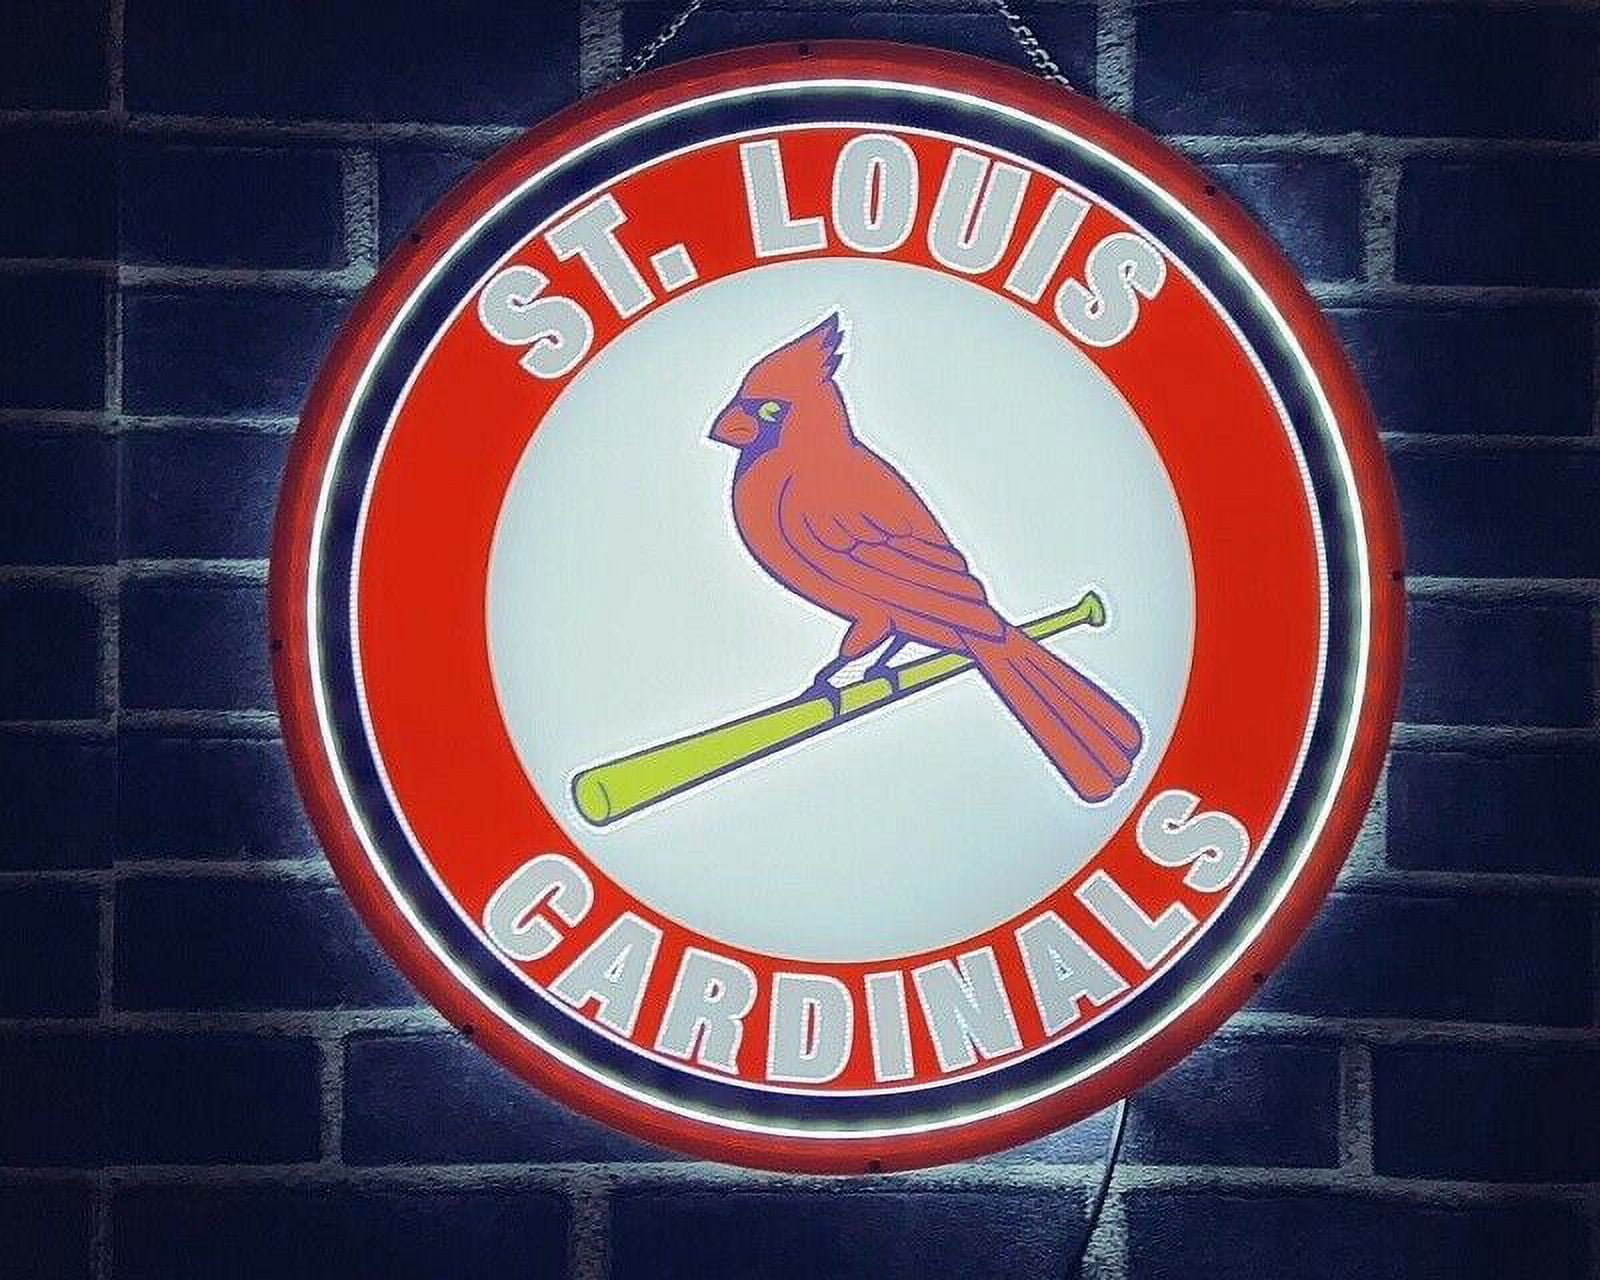 St. Louis Cardinals LED Neon Sign - Lynseriess